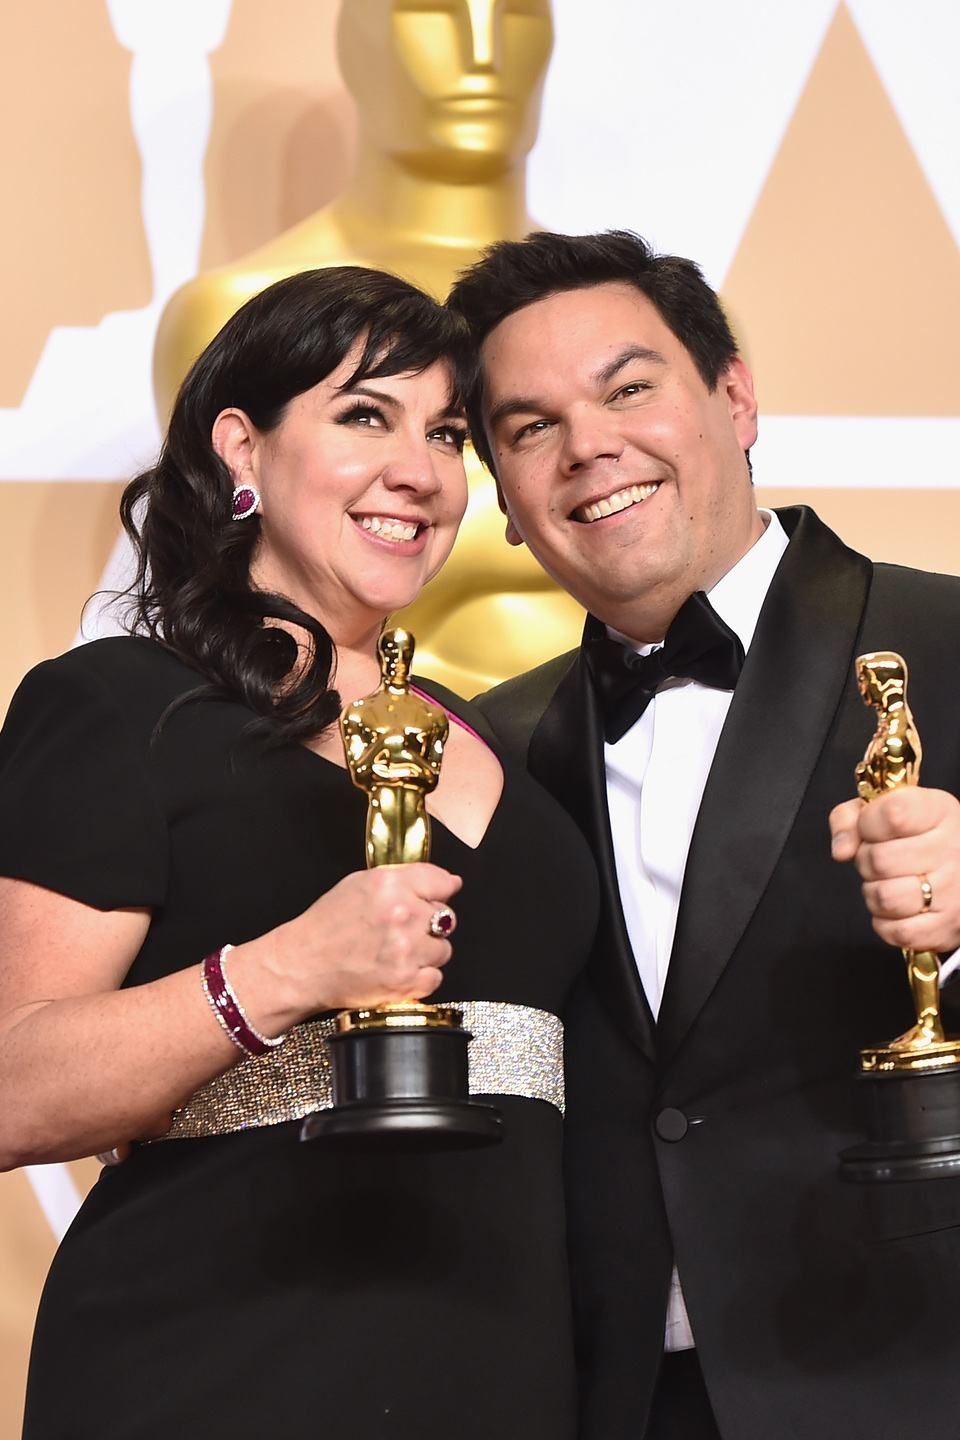 Composers Kristen Anderson-Lopez (L) and Robert Lopez, winners of the Best Original Song award for 'Remember Me' from 'Coco,' pose in the press room during the 90th Annual Academy Awards at Hollywood & Highland Center on March 4, 2018 in Hollywood, California. (Photo by Alberto E. Rodriguez/Getty Images)